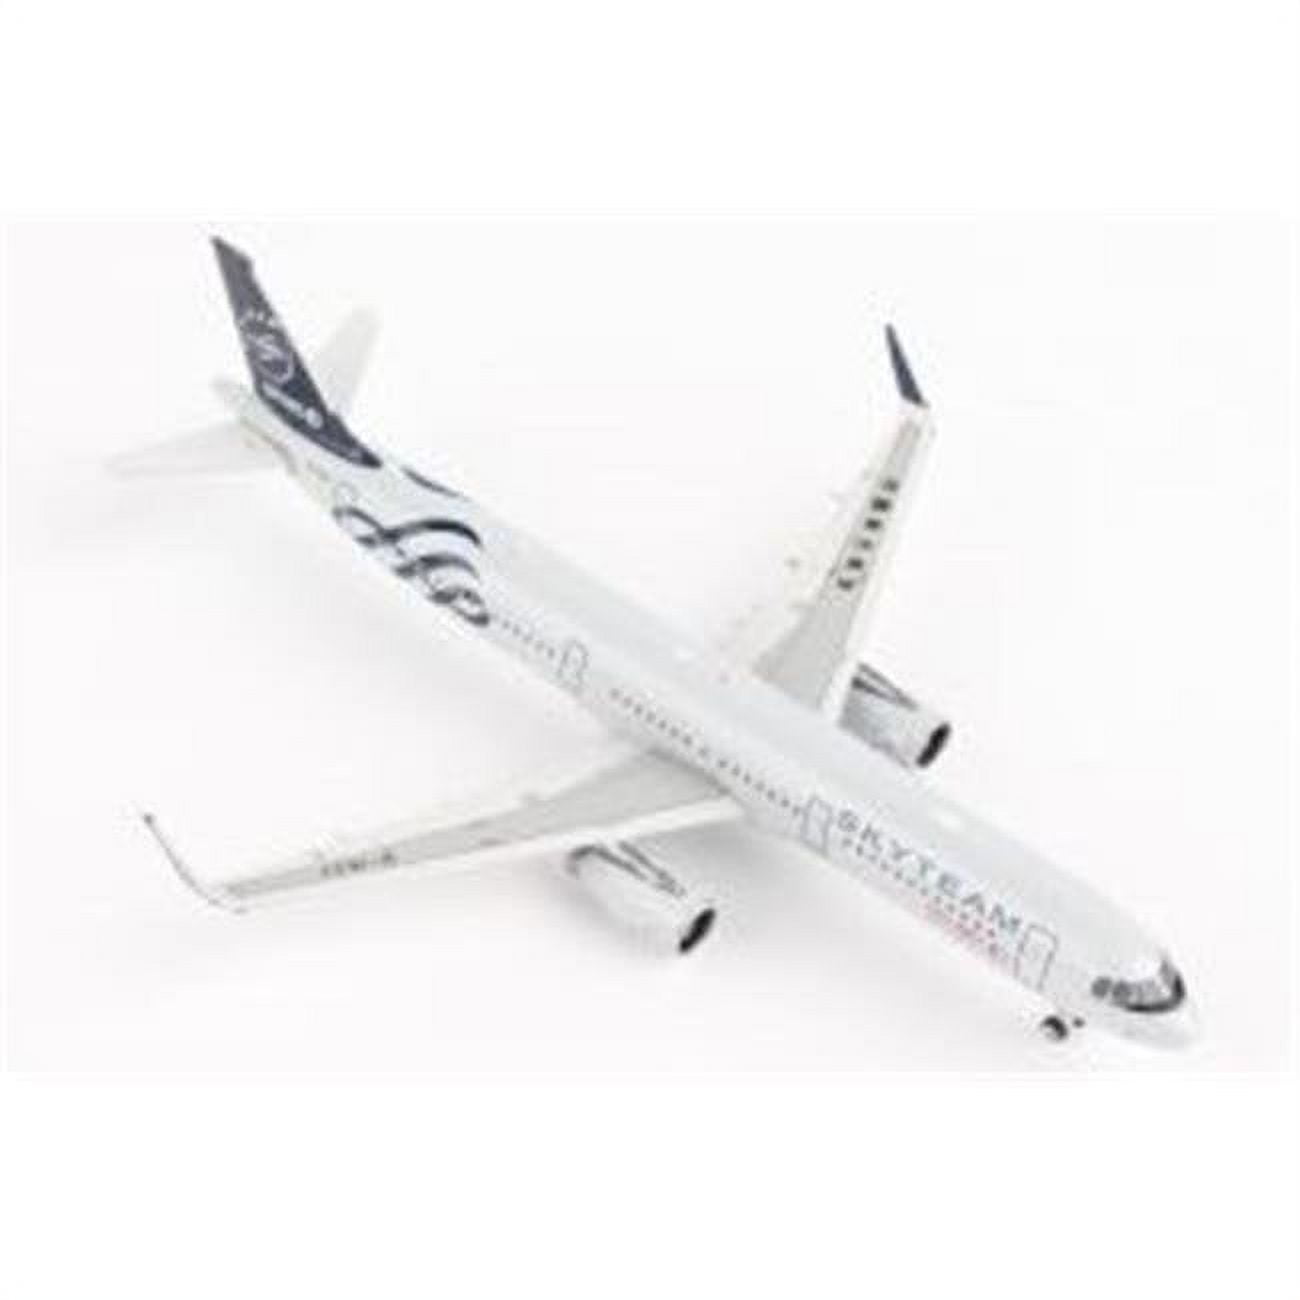 Picture of Phoenix PH2109 A321S 1-400 Scale Skyteam Reg-B-1837 China Eastern Model Airplane